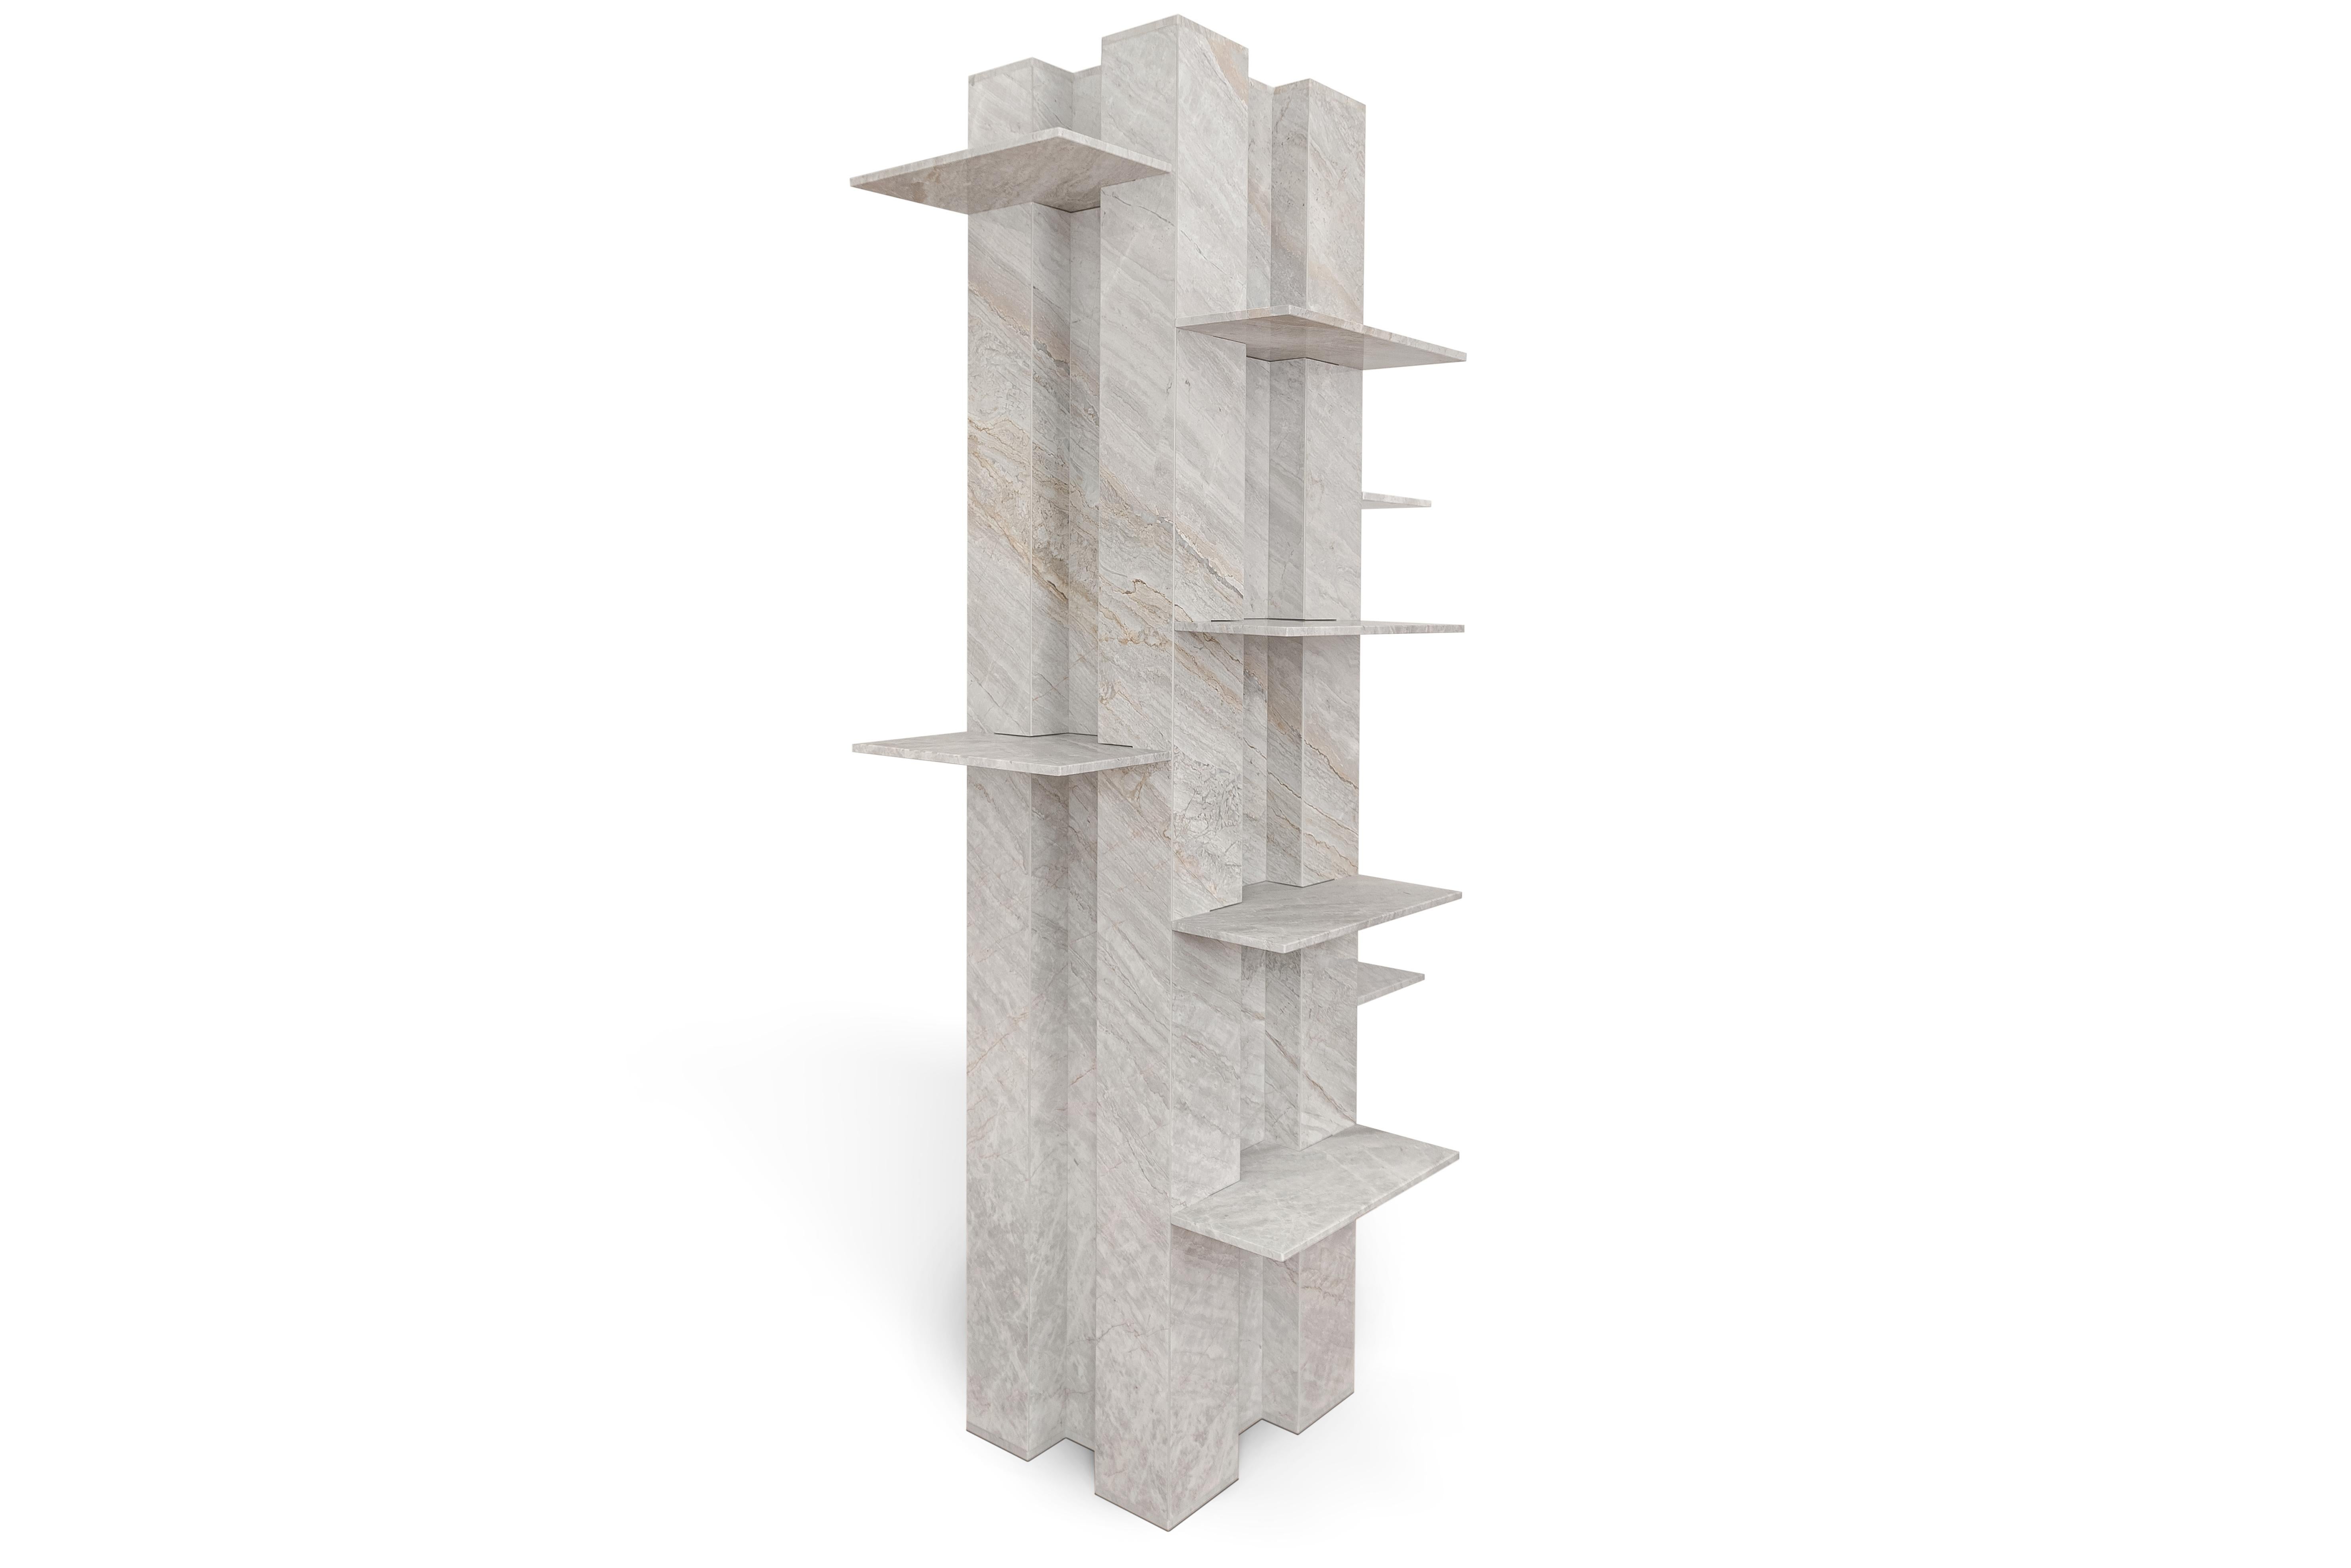 Orthogonals Grande Freestanding Marble Bookcase by ​STUDIO IB MILANO
Signed
Limited Edition
Dimensions: D 70 x W 70 x H 170 cm.
Materials: Cascata marble

Also available in other stones.

A true work of art that combines symmetrical, pure, and